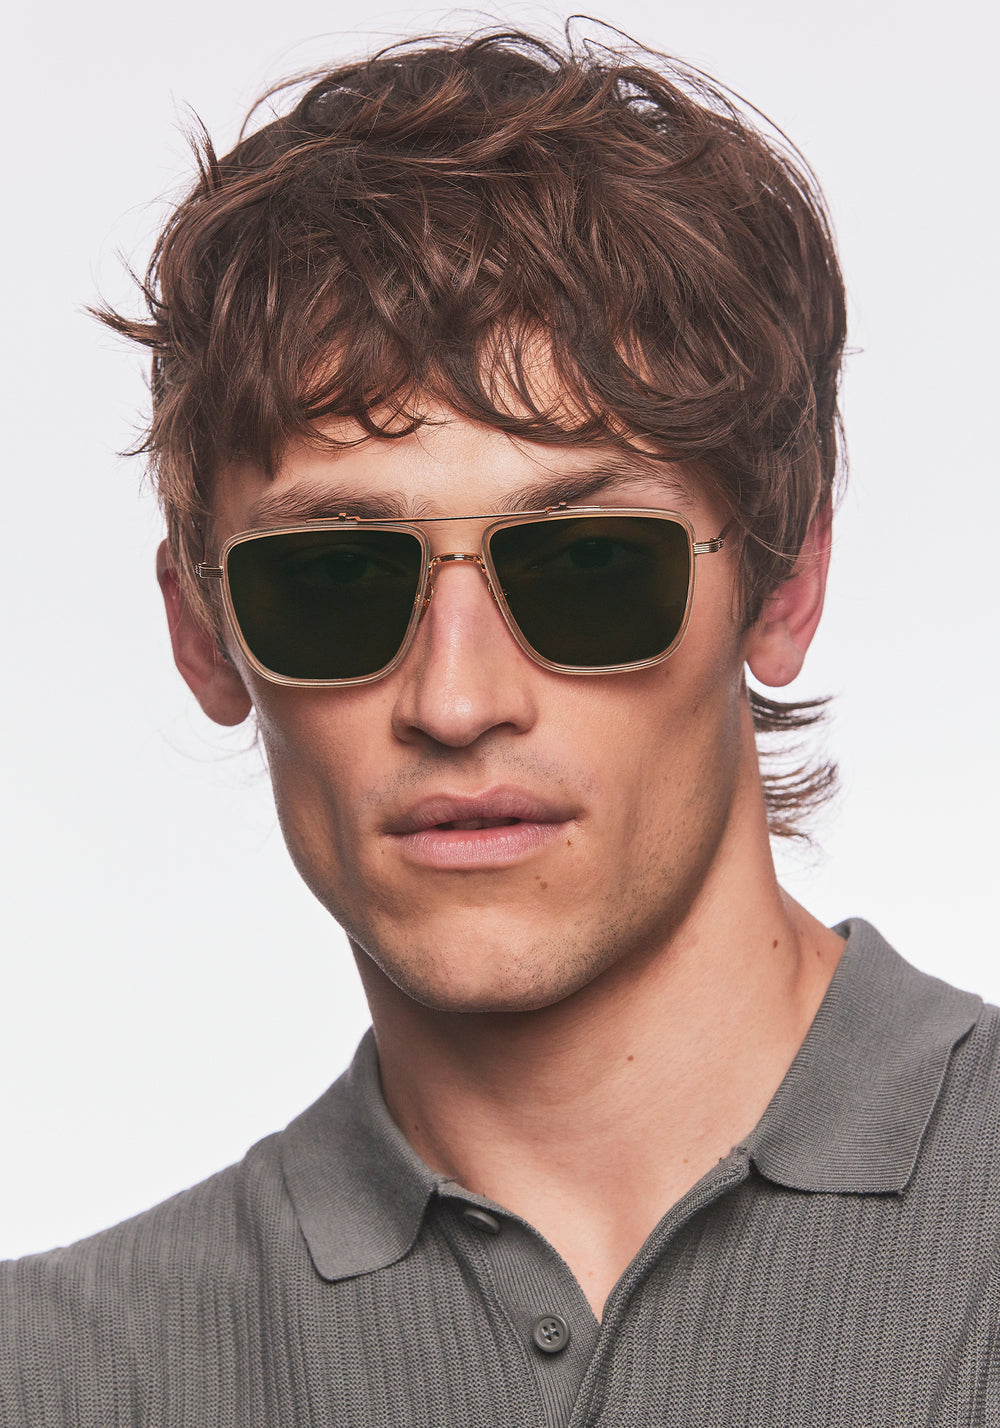 VAIL | 18K Titanium + Haze Polarized Handcrafted, luxury acetate and gold plated stainless steel square oversized aviator polarized KREWE sunglasses mens model | Model: Cameron